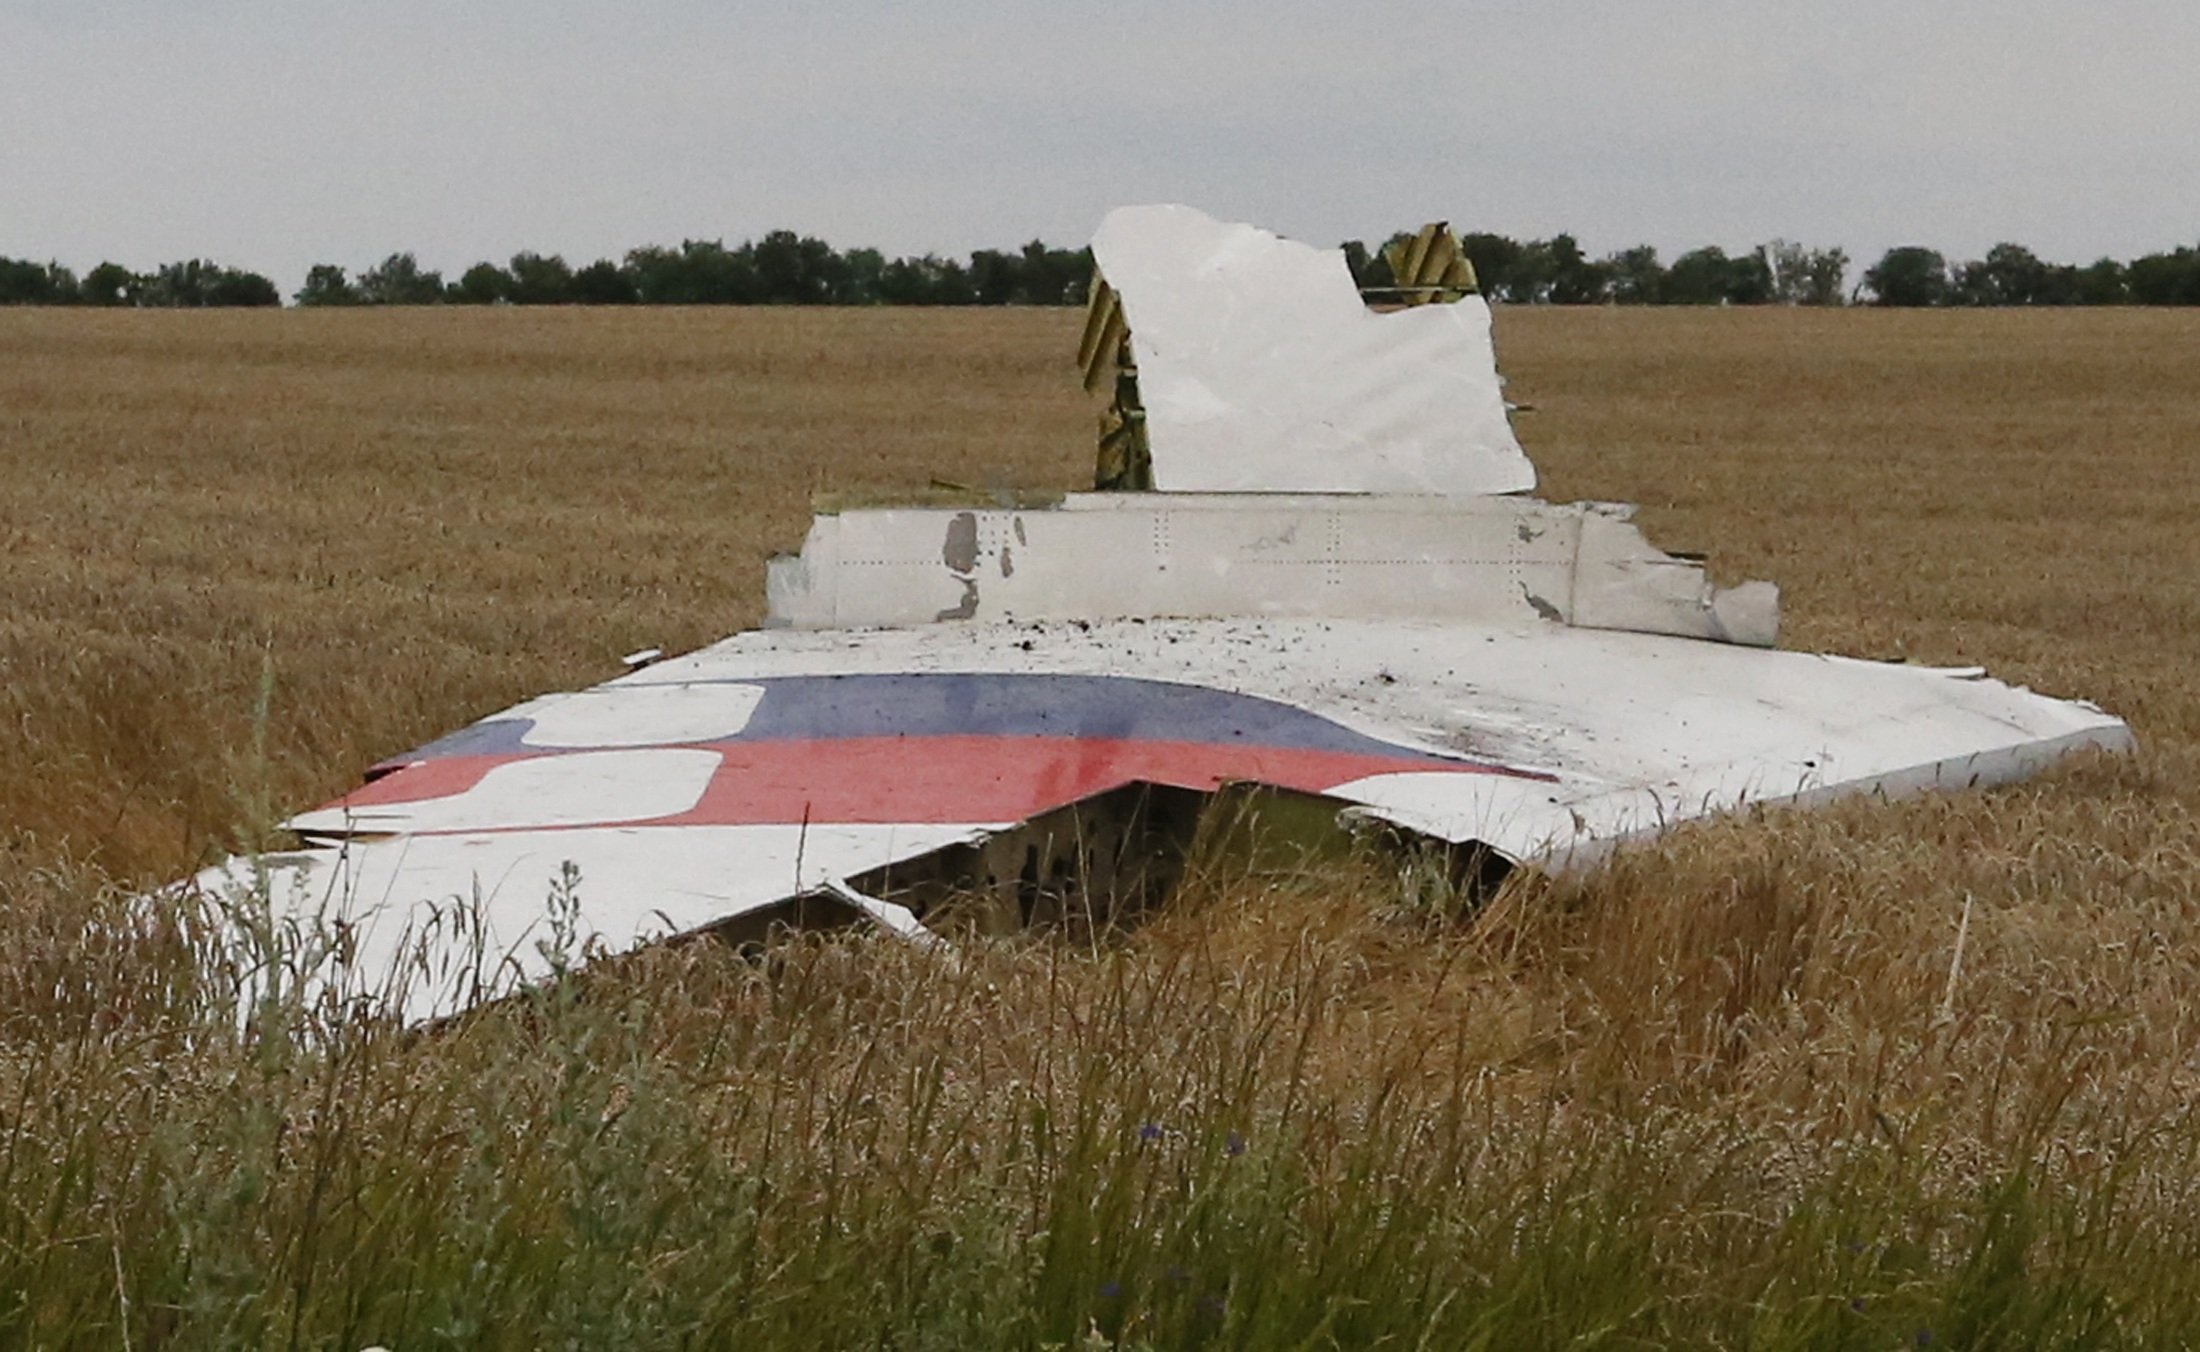 A part of the wreckage of a Malaysia Airlines Boeing 777 plane is seen after it crashed near the settlement of Grabovo in the Donetsk region, July 17, 2014. (Maxim Zmeyev—Reuters)